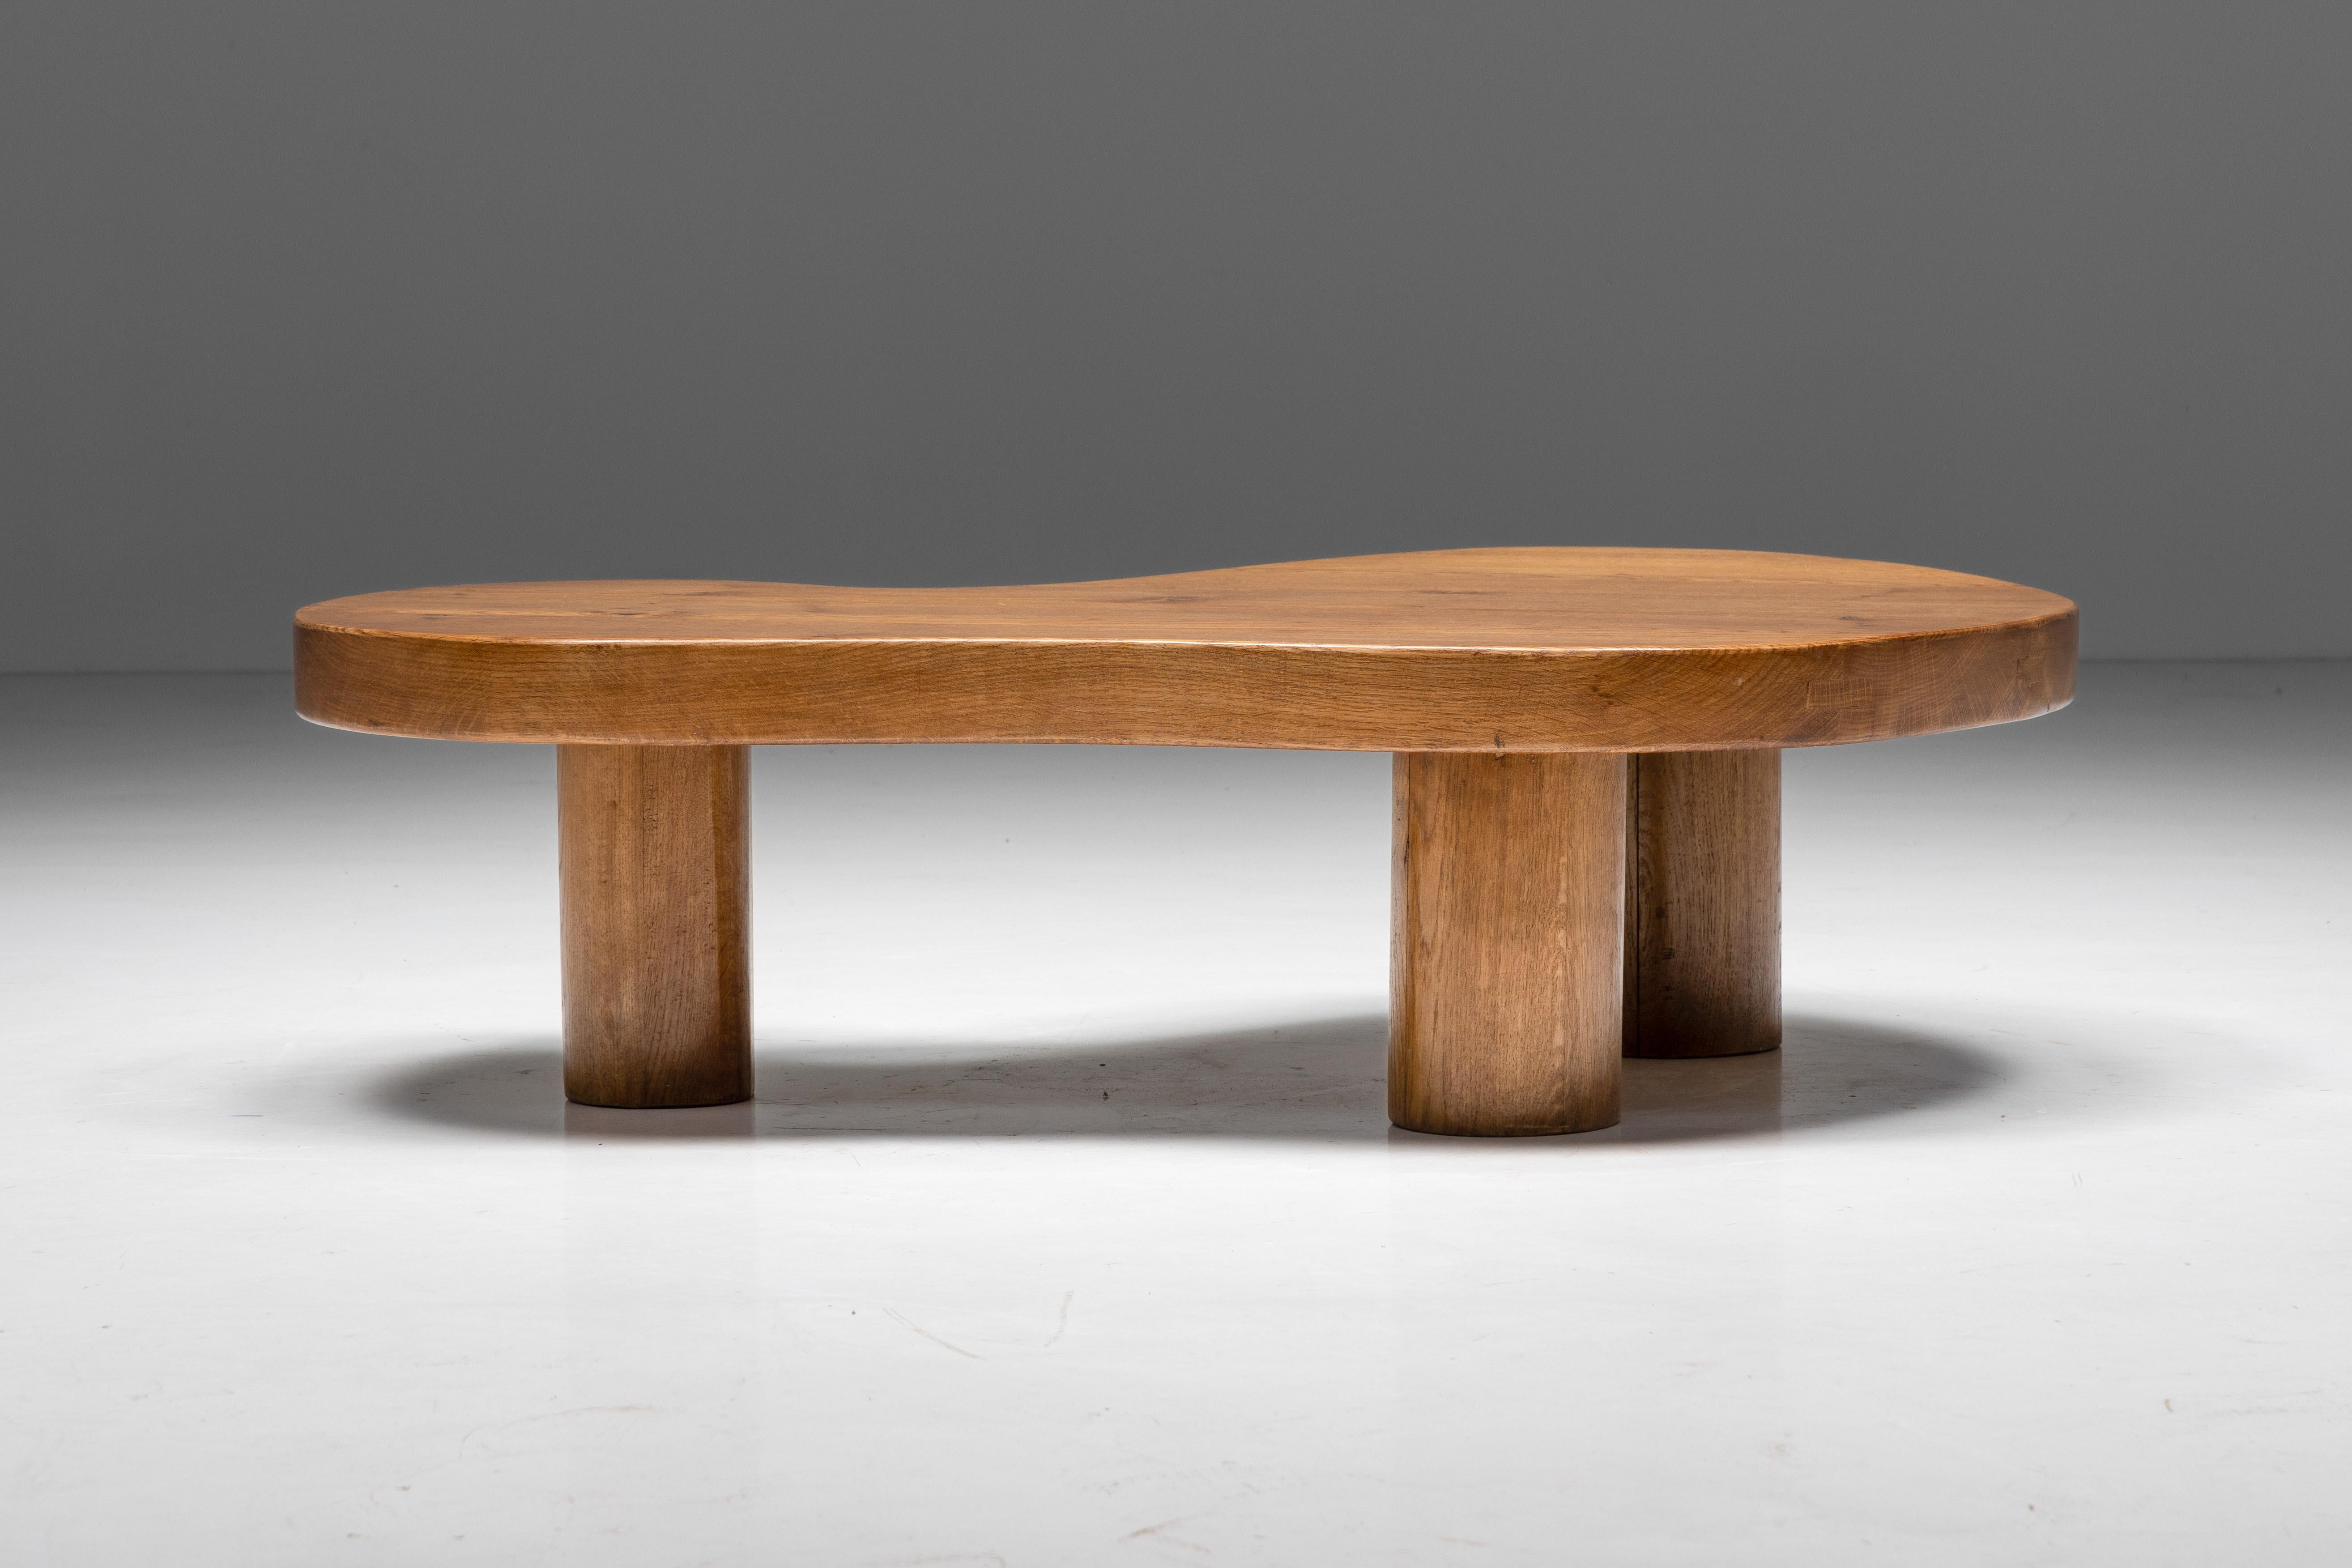 French Organic Modernist Coffee Table, France, 1950s